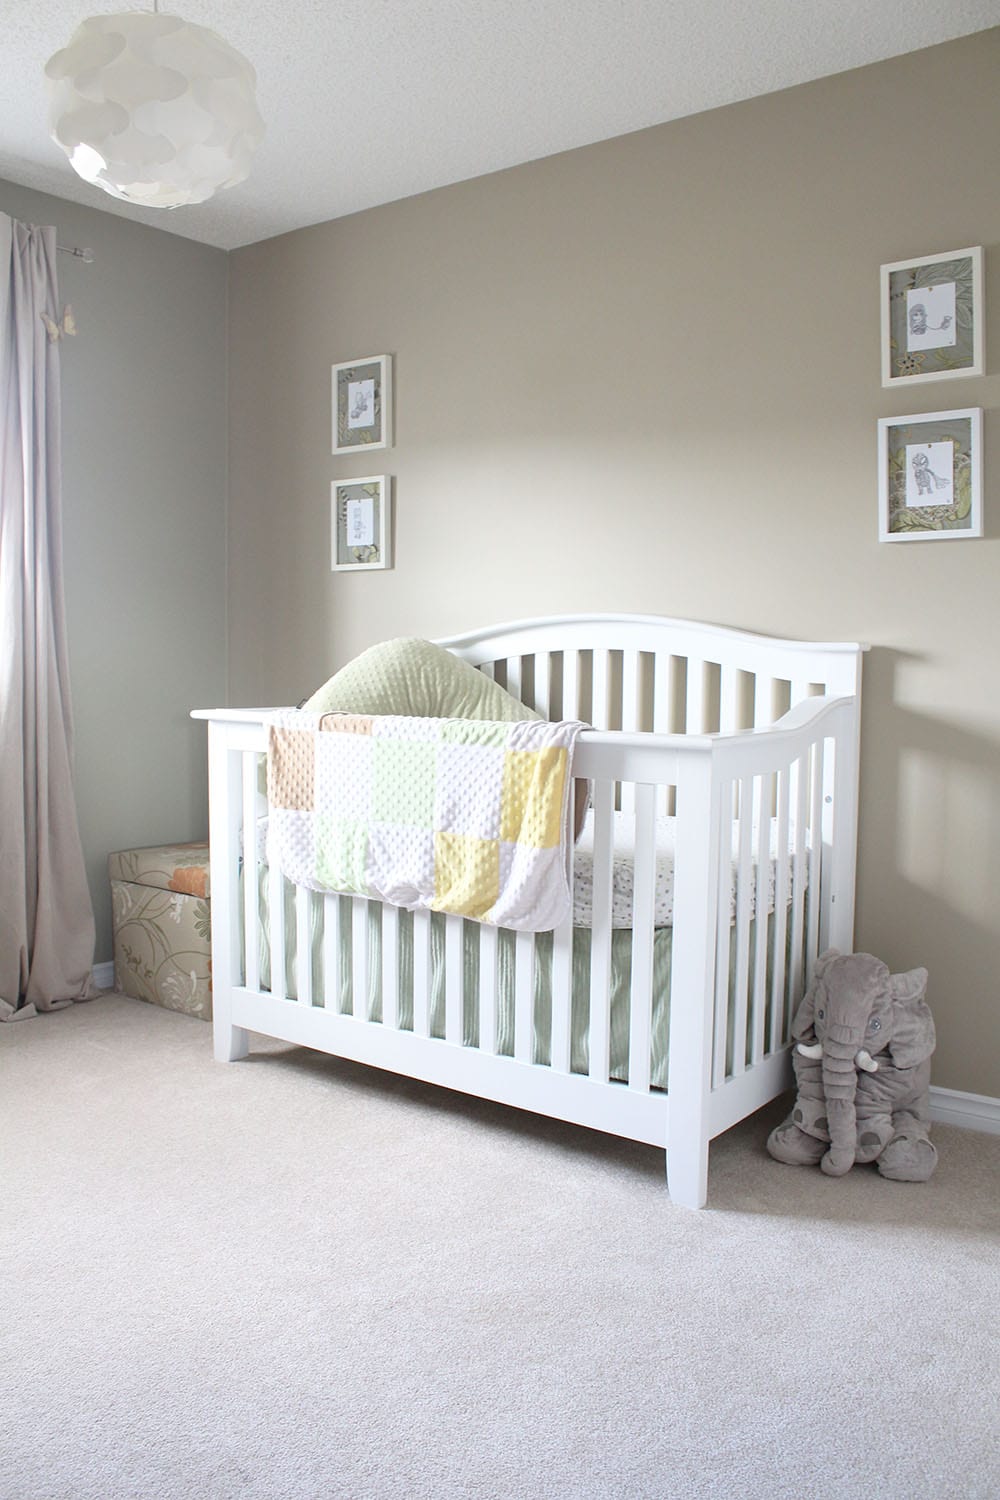 A neutral baby bedroom with a white crib and baby superhero art.